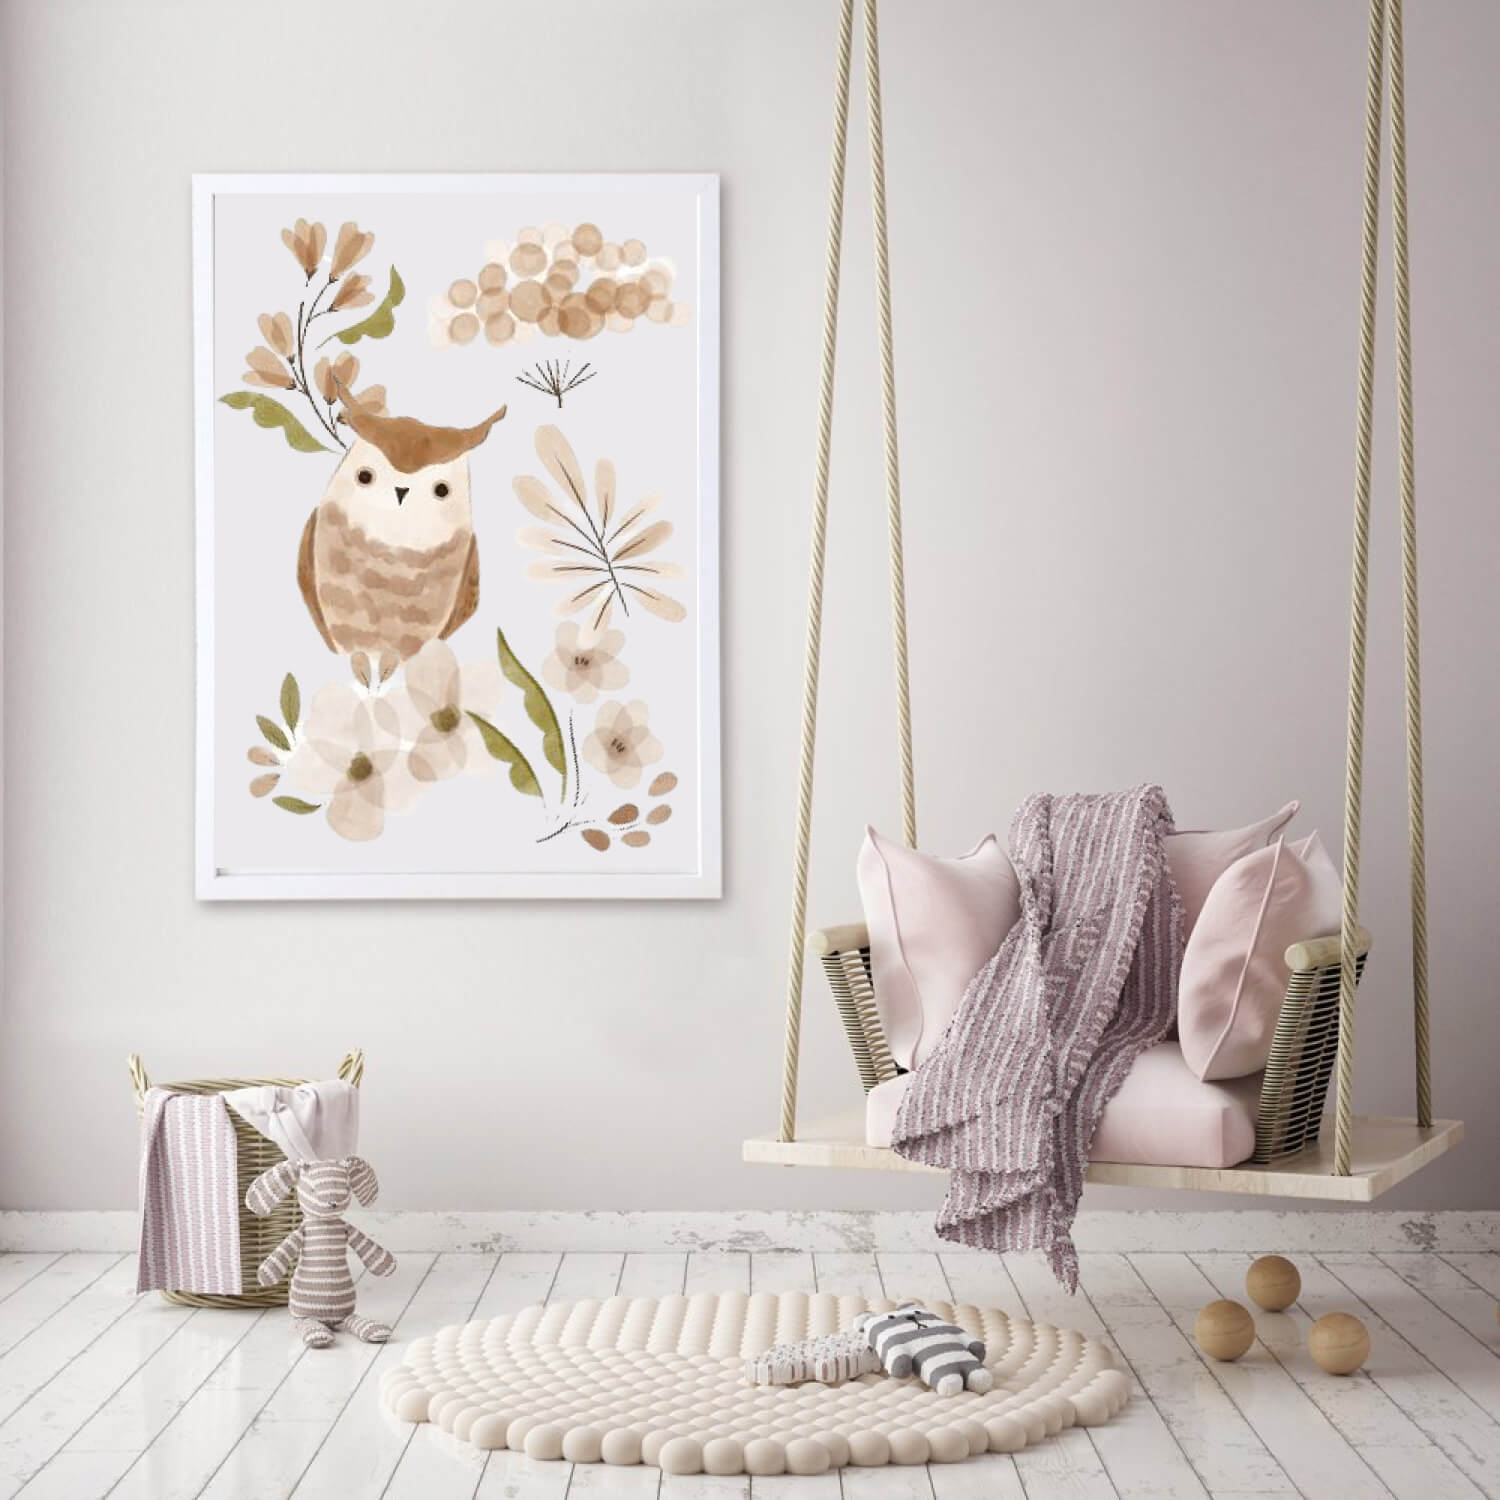 Painting with an owl and beautiful airy flowers painted in watercolor.